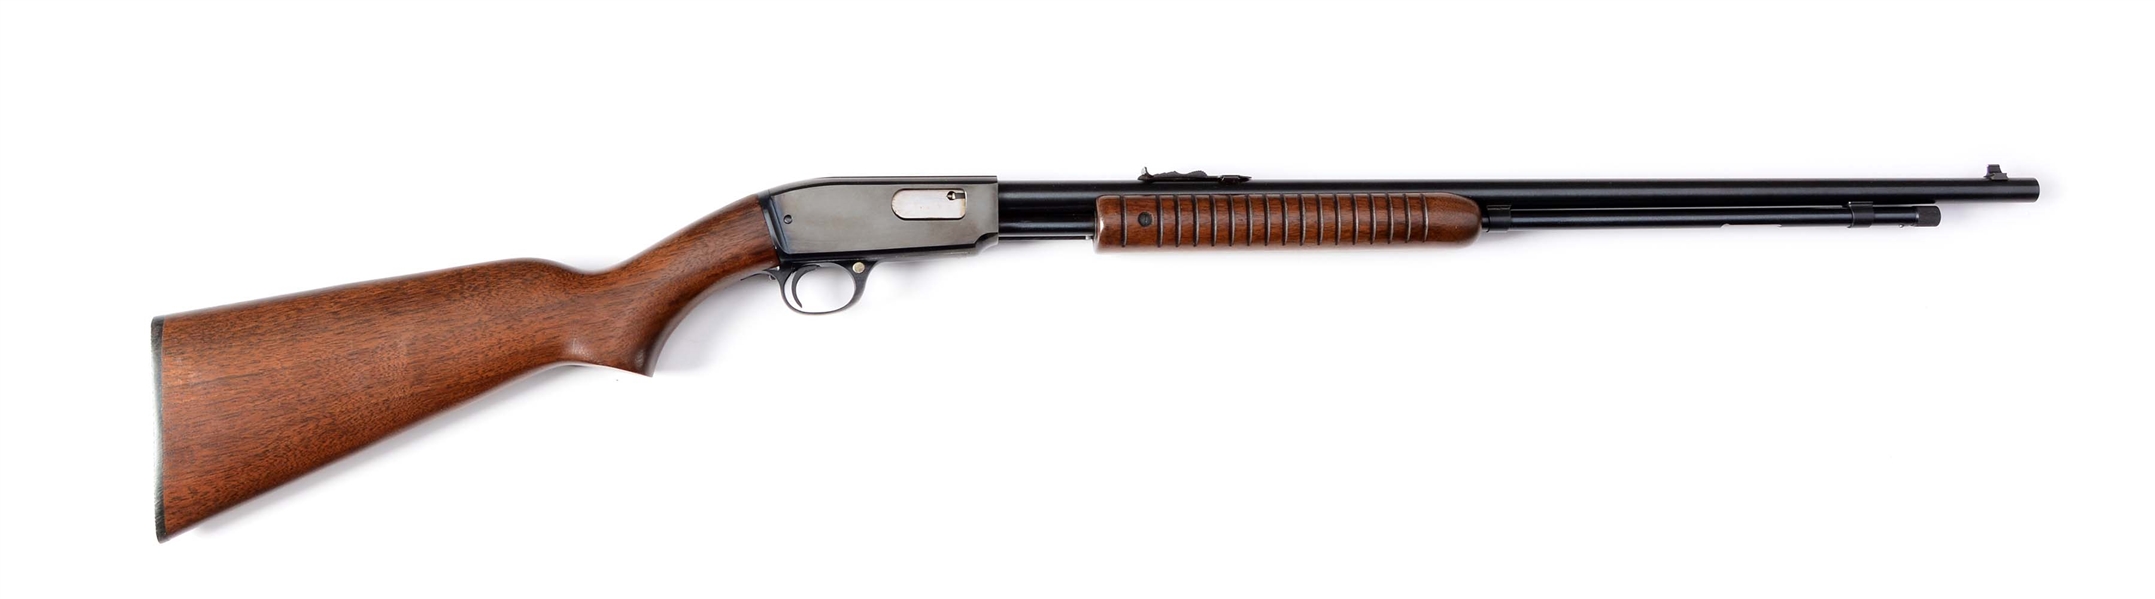 (C) NEAR NEW WINCHESTER MODEL 61 .22 MAGNUM SLIDE ACTION RIFLE WITH BOX(1962).